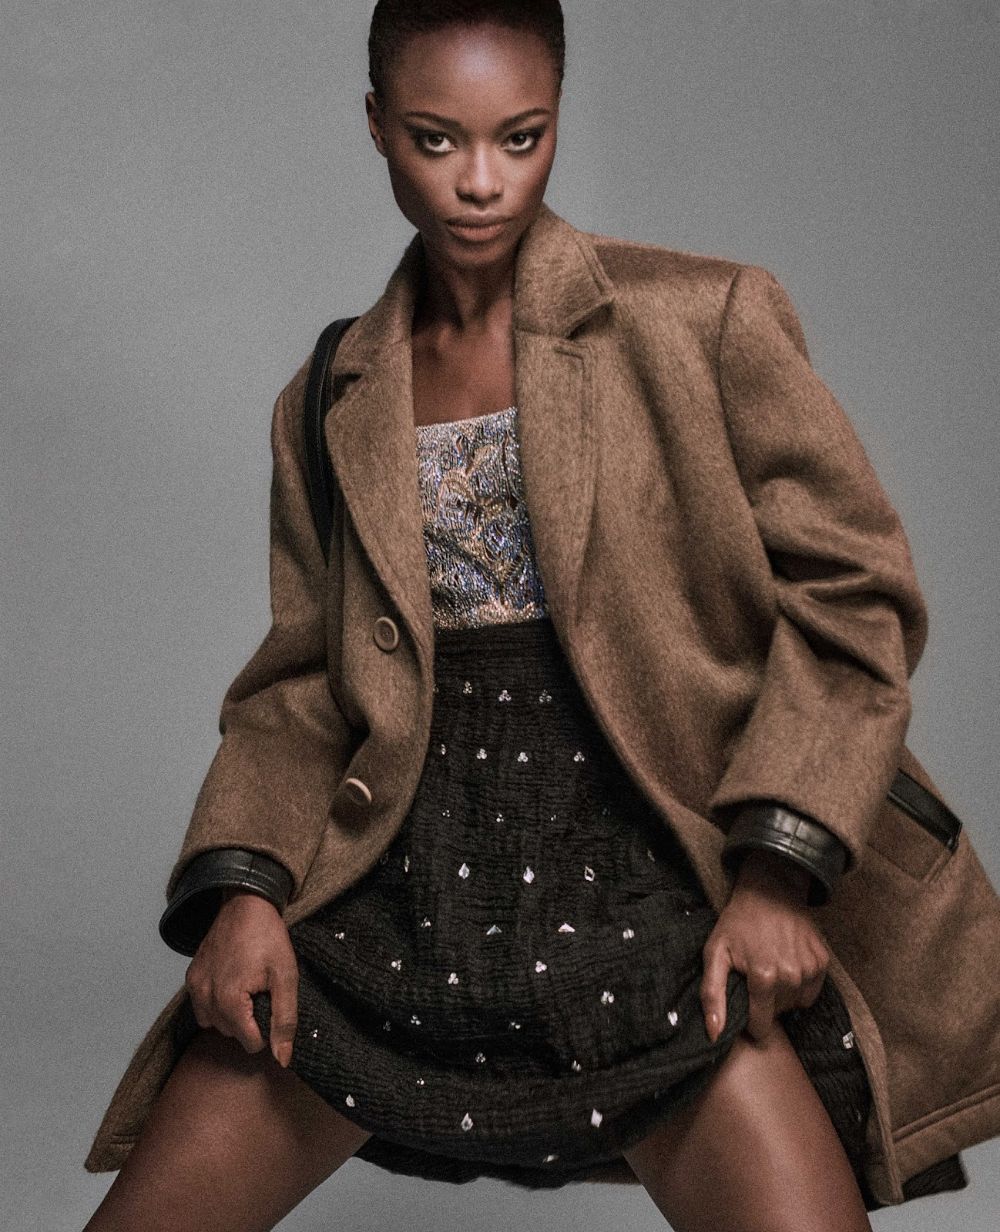 Express Lane: Mayowa Nicholas by Chris Colls for Elle Magazine September 2021. Clothing & Accessories: Coat, dress by Louis Vuitton; Shoulder bag by Louis Vuitton x Fornasetti